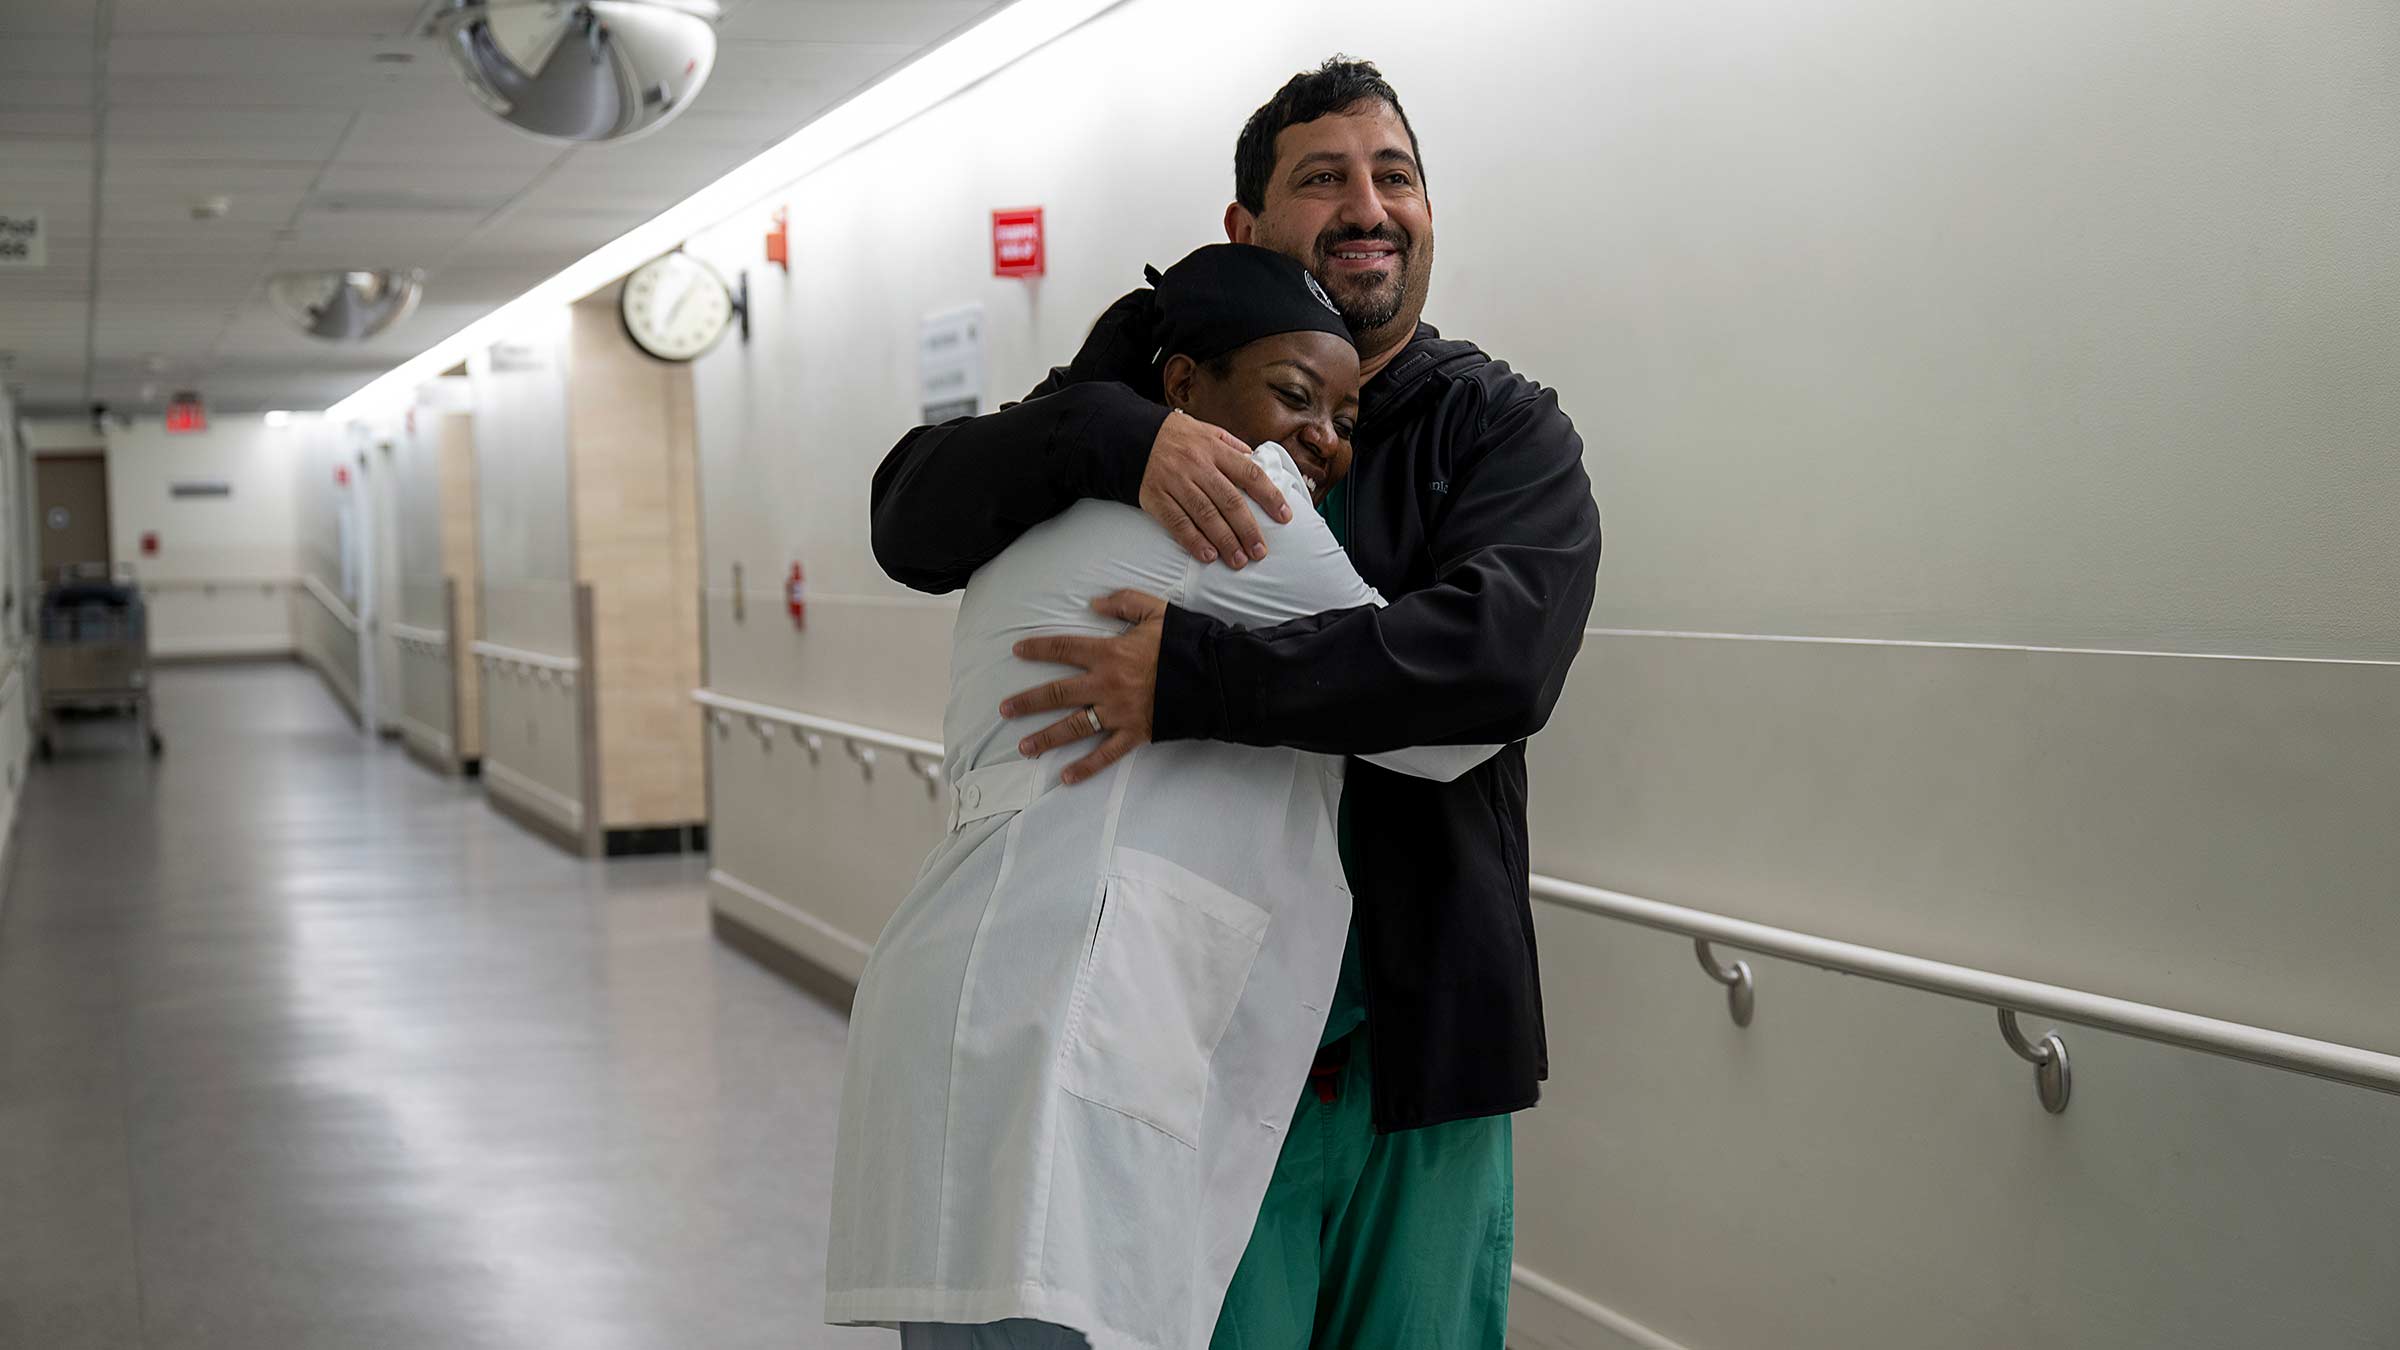 Dr. Kerrry-Ann Mitchell and Dr. Patrick Youseef hug in the hallway of the hospital